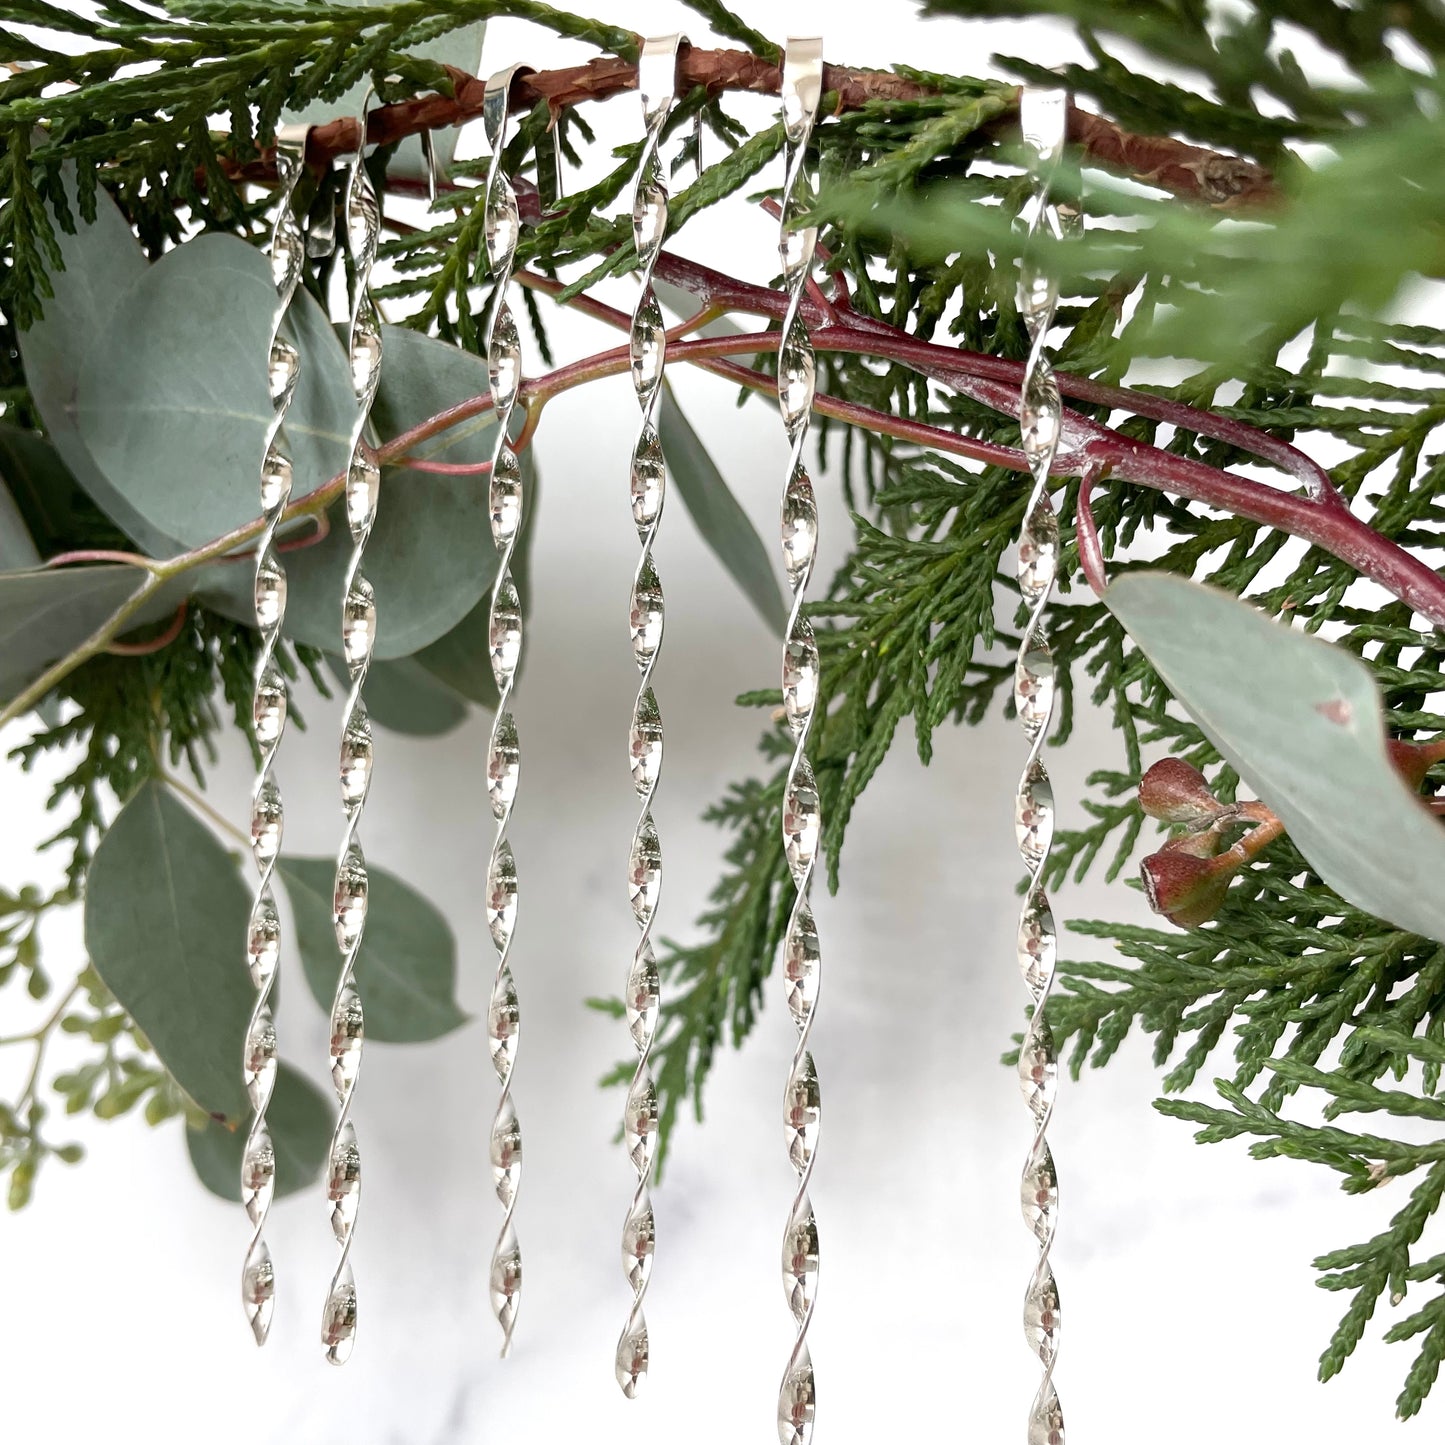 six sterling silver christmas tree ornaments displayed on greenery with a white background